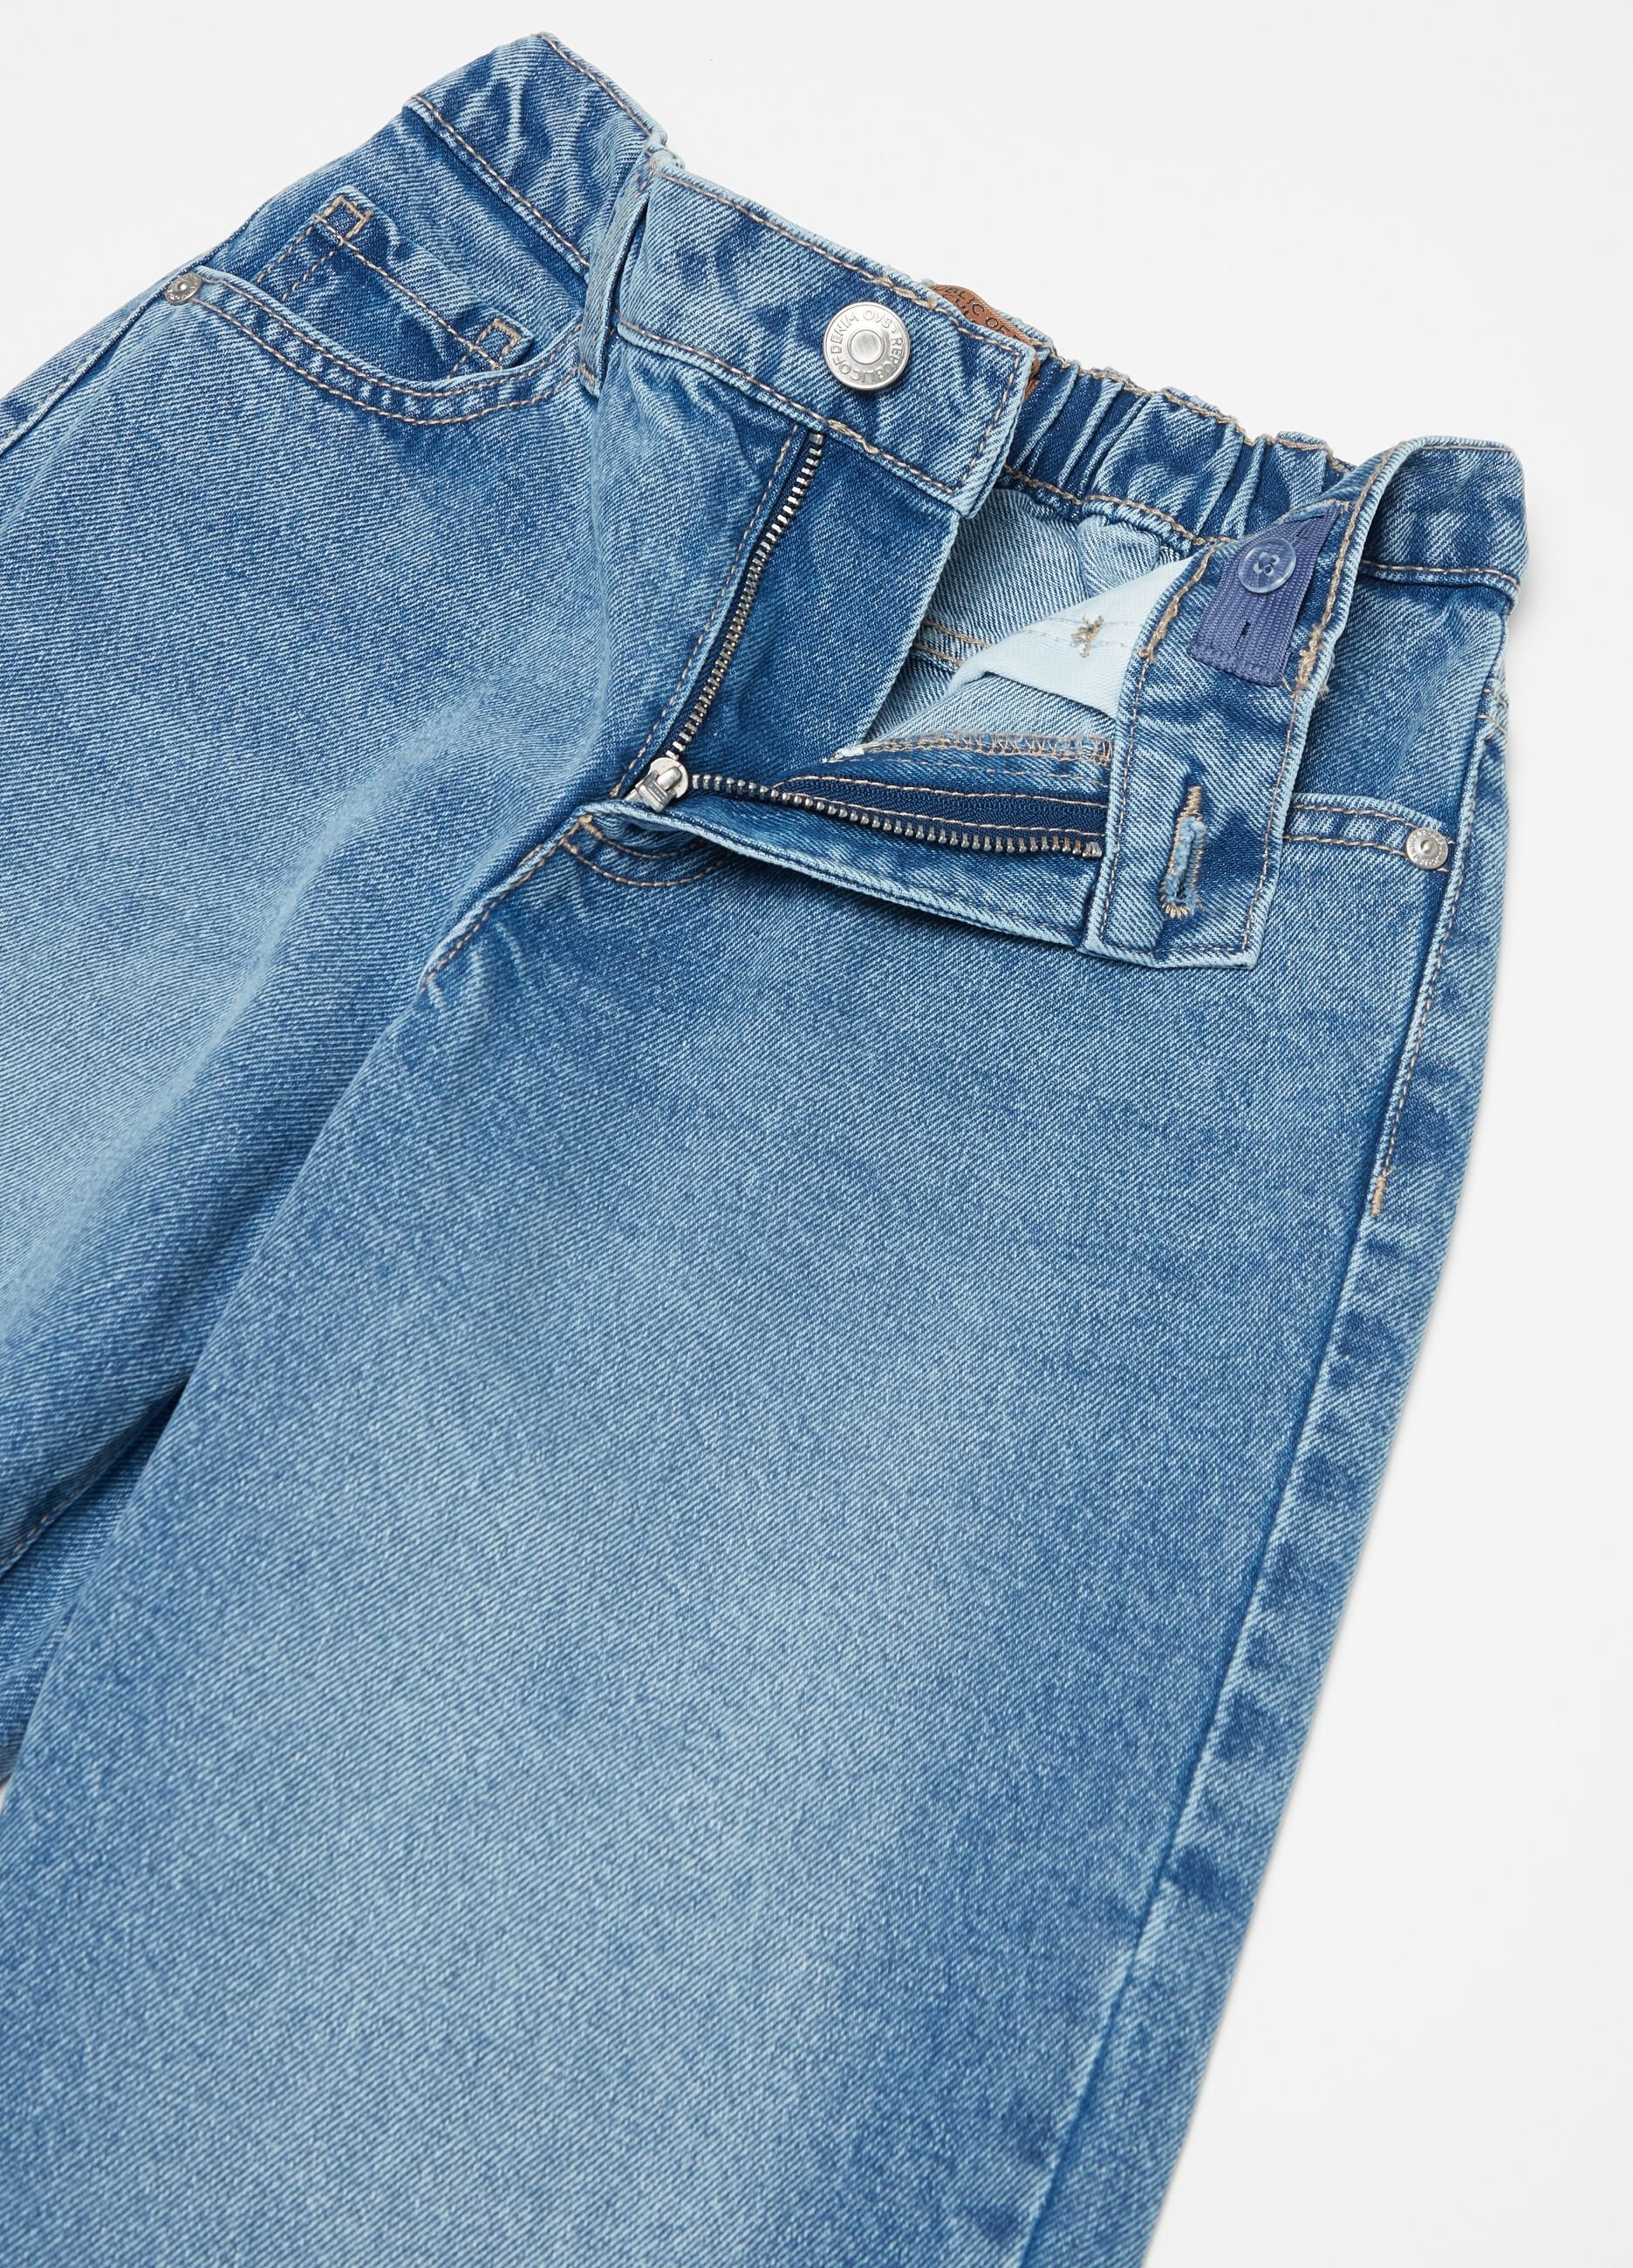 Culotte-style jeans with five pockets